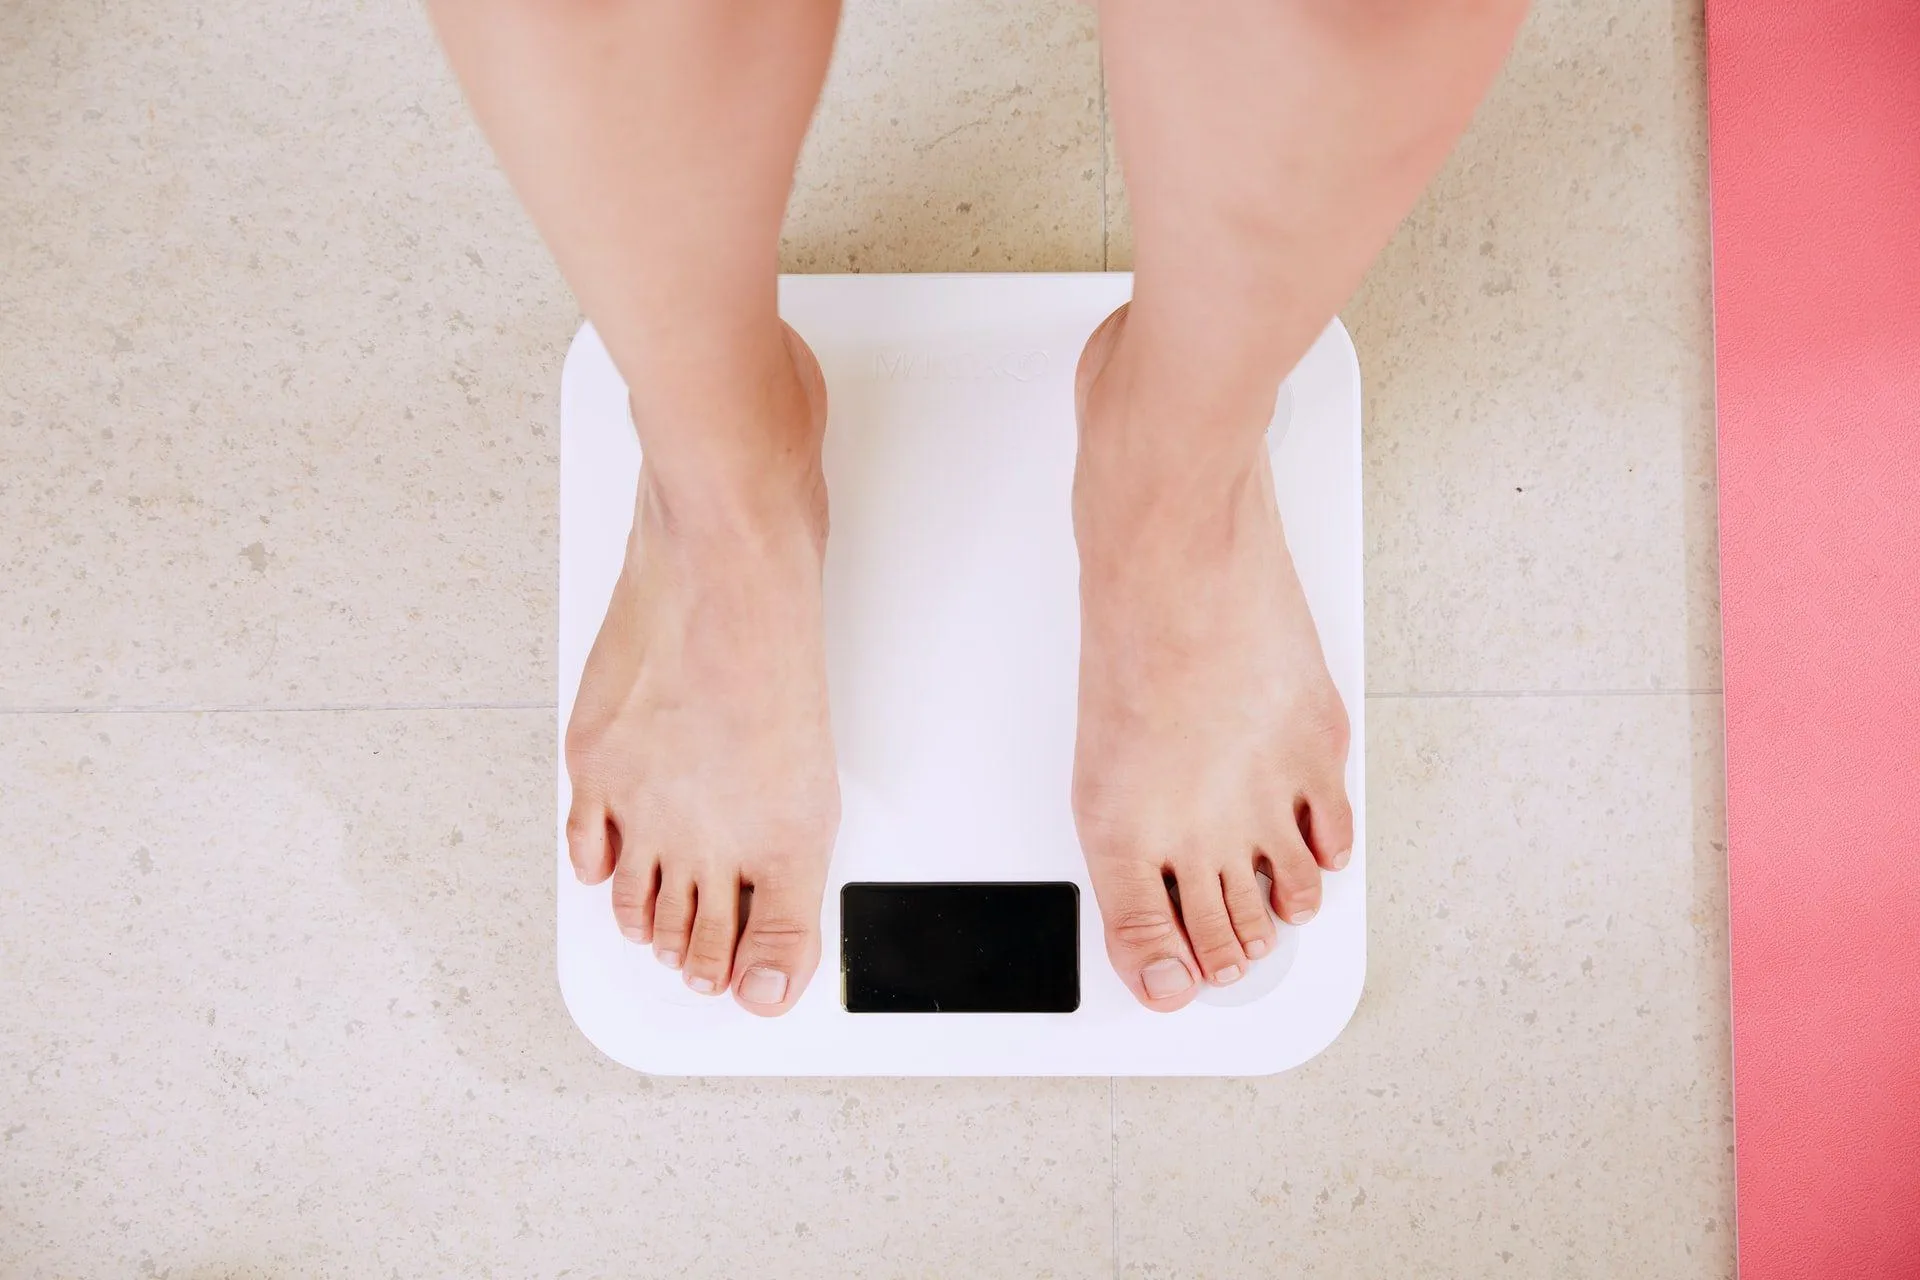 Ozempic: The Global Misuse of This Type 2 Diabetes Medication for Weight Loss